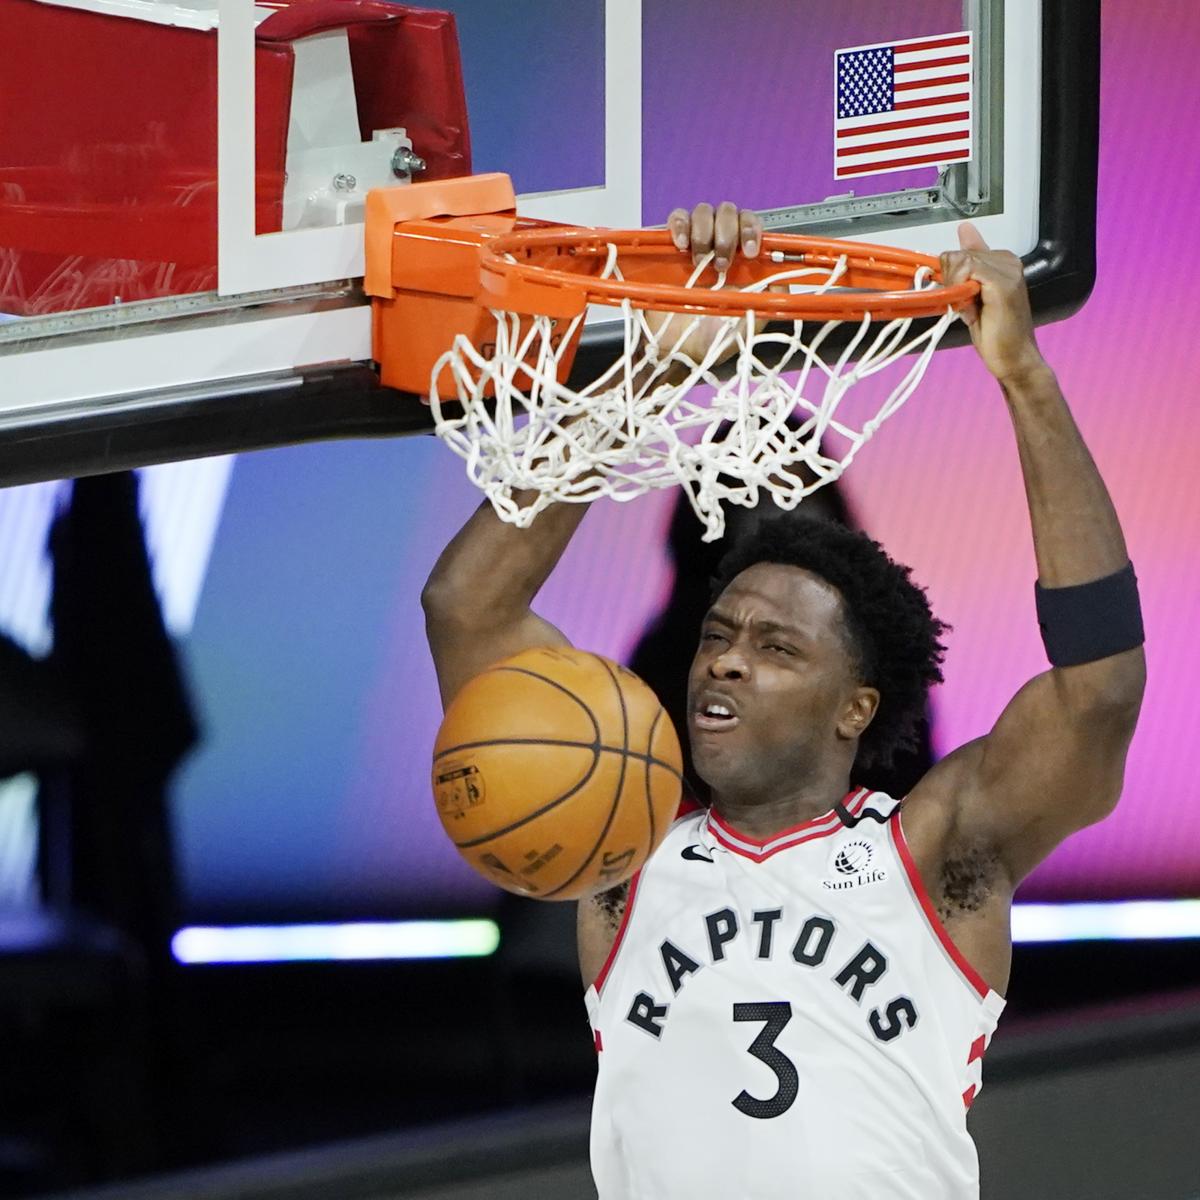 Raptors rookie OG Anunoby earns high praise from LeBron James